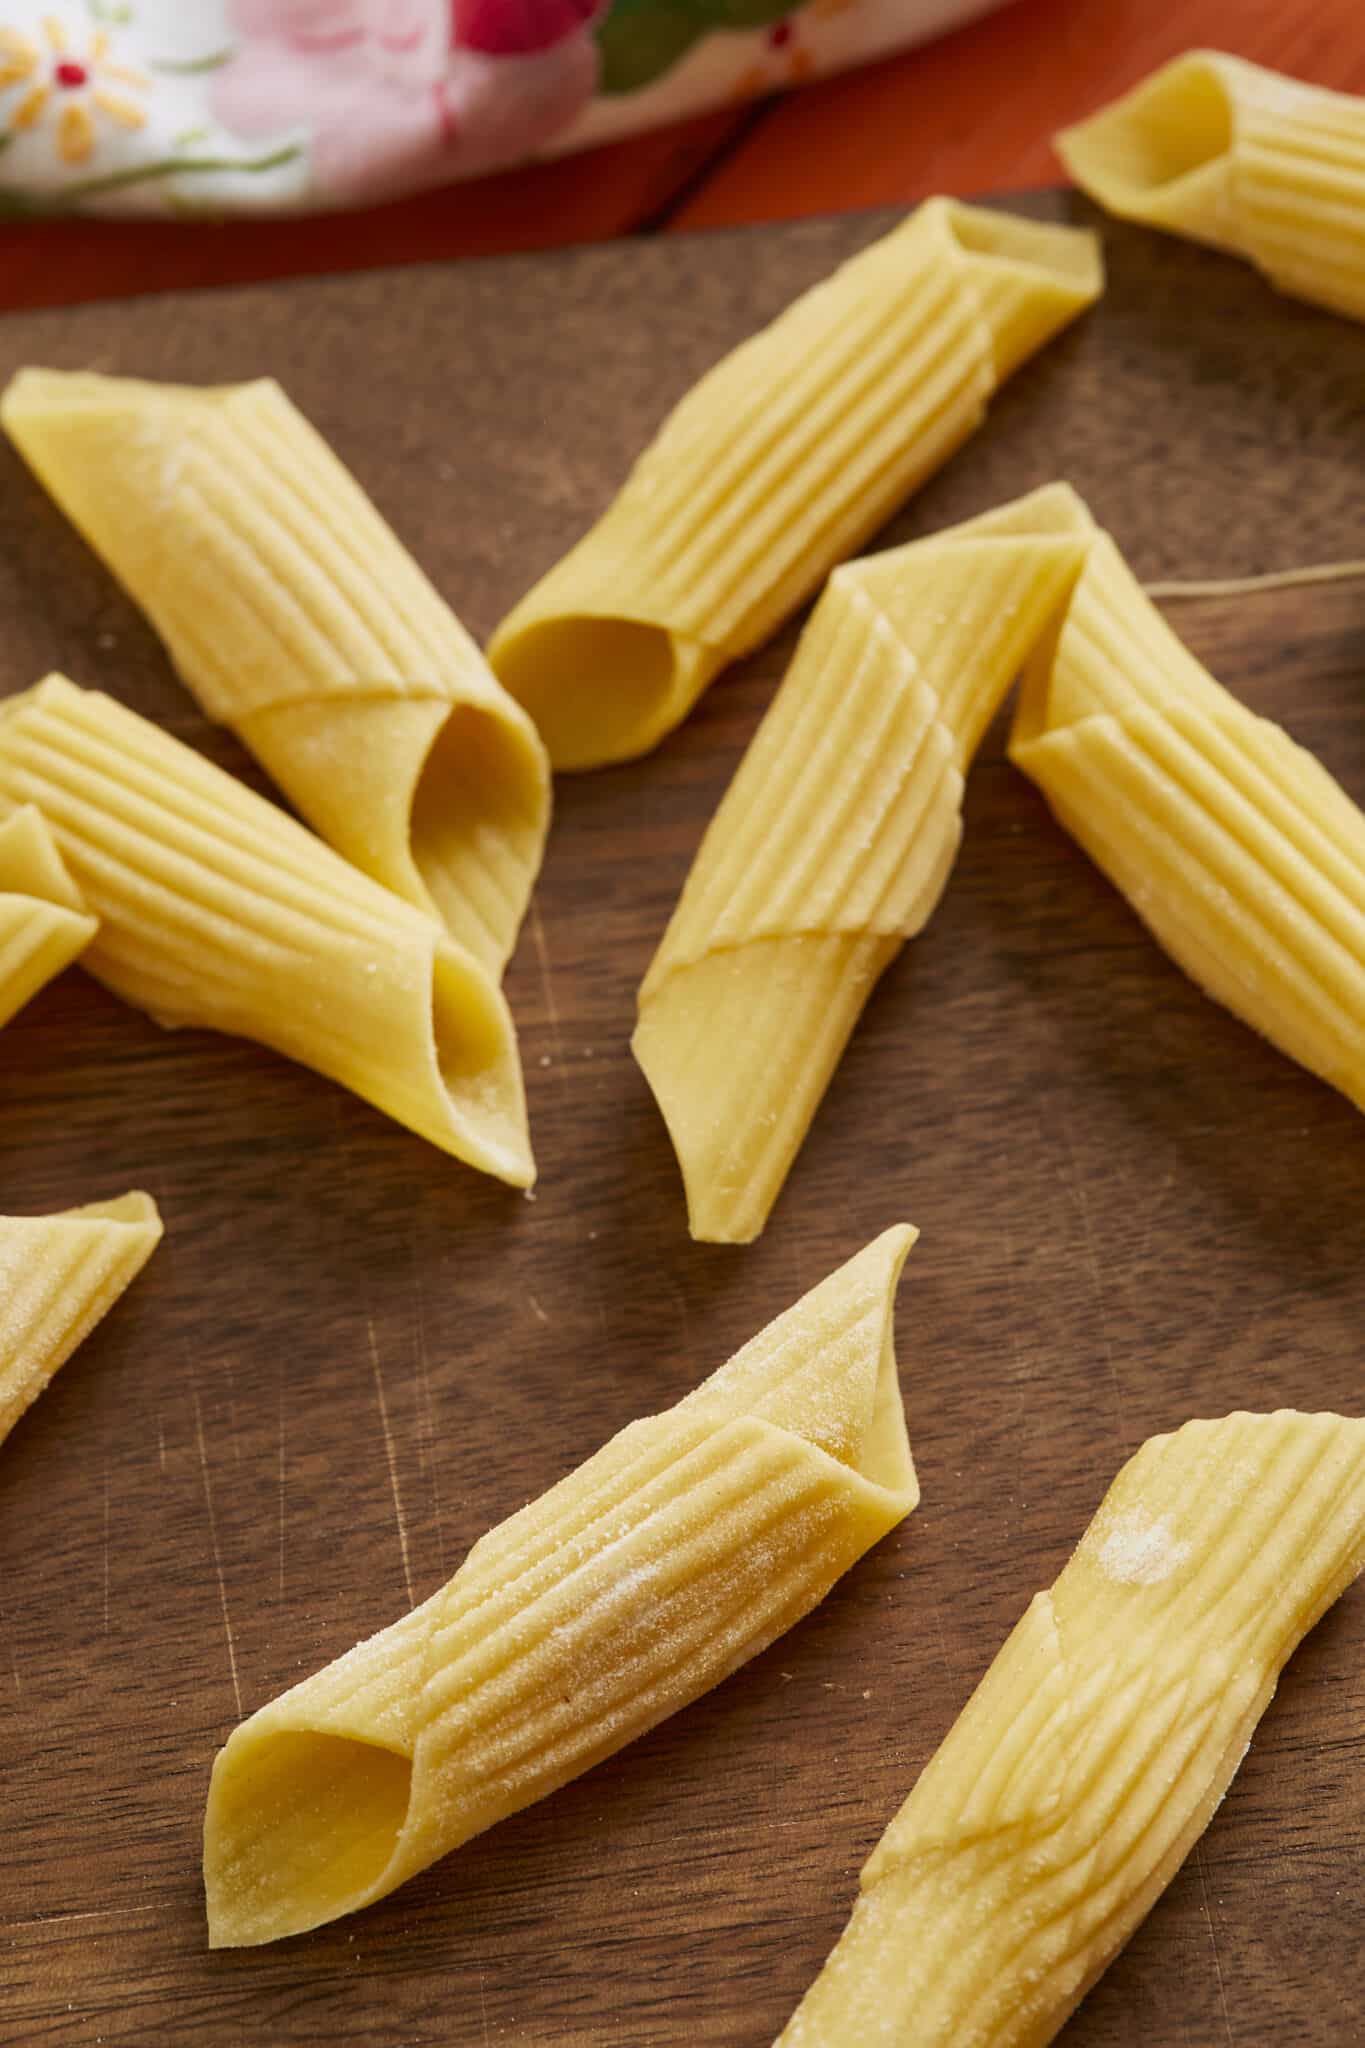 Penne pasta is drying on a wooden board. It's in a tubular-shape cut diagonally on the ends and resembles an old-fashioned writing quill that was dipped in ink. 